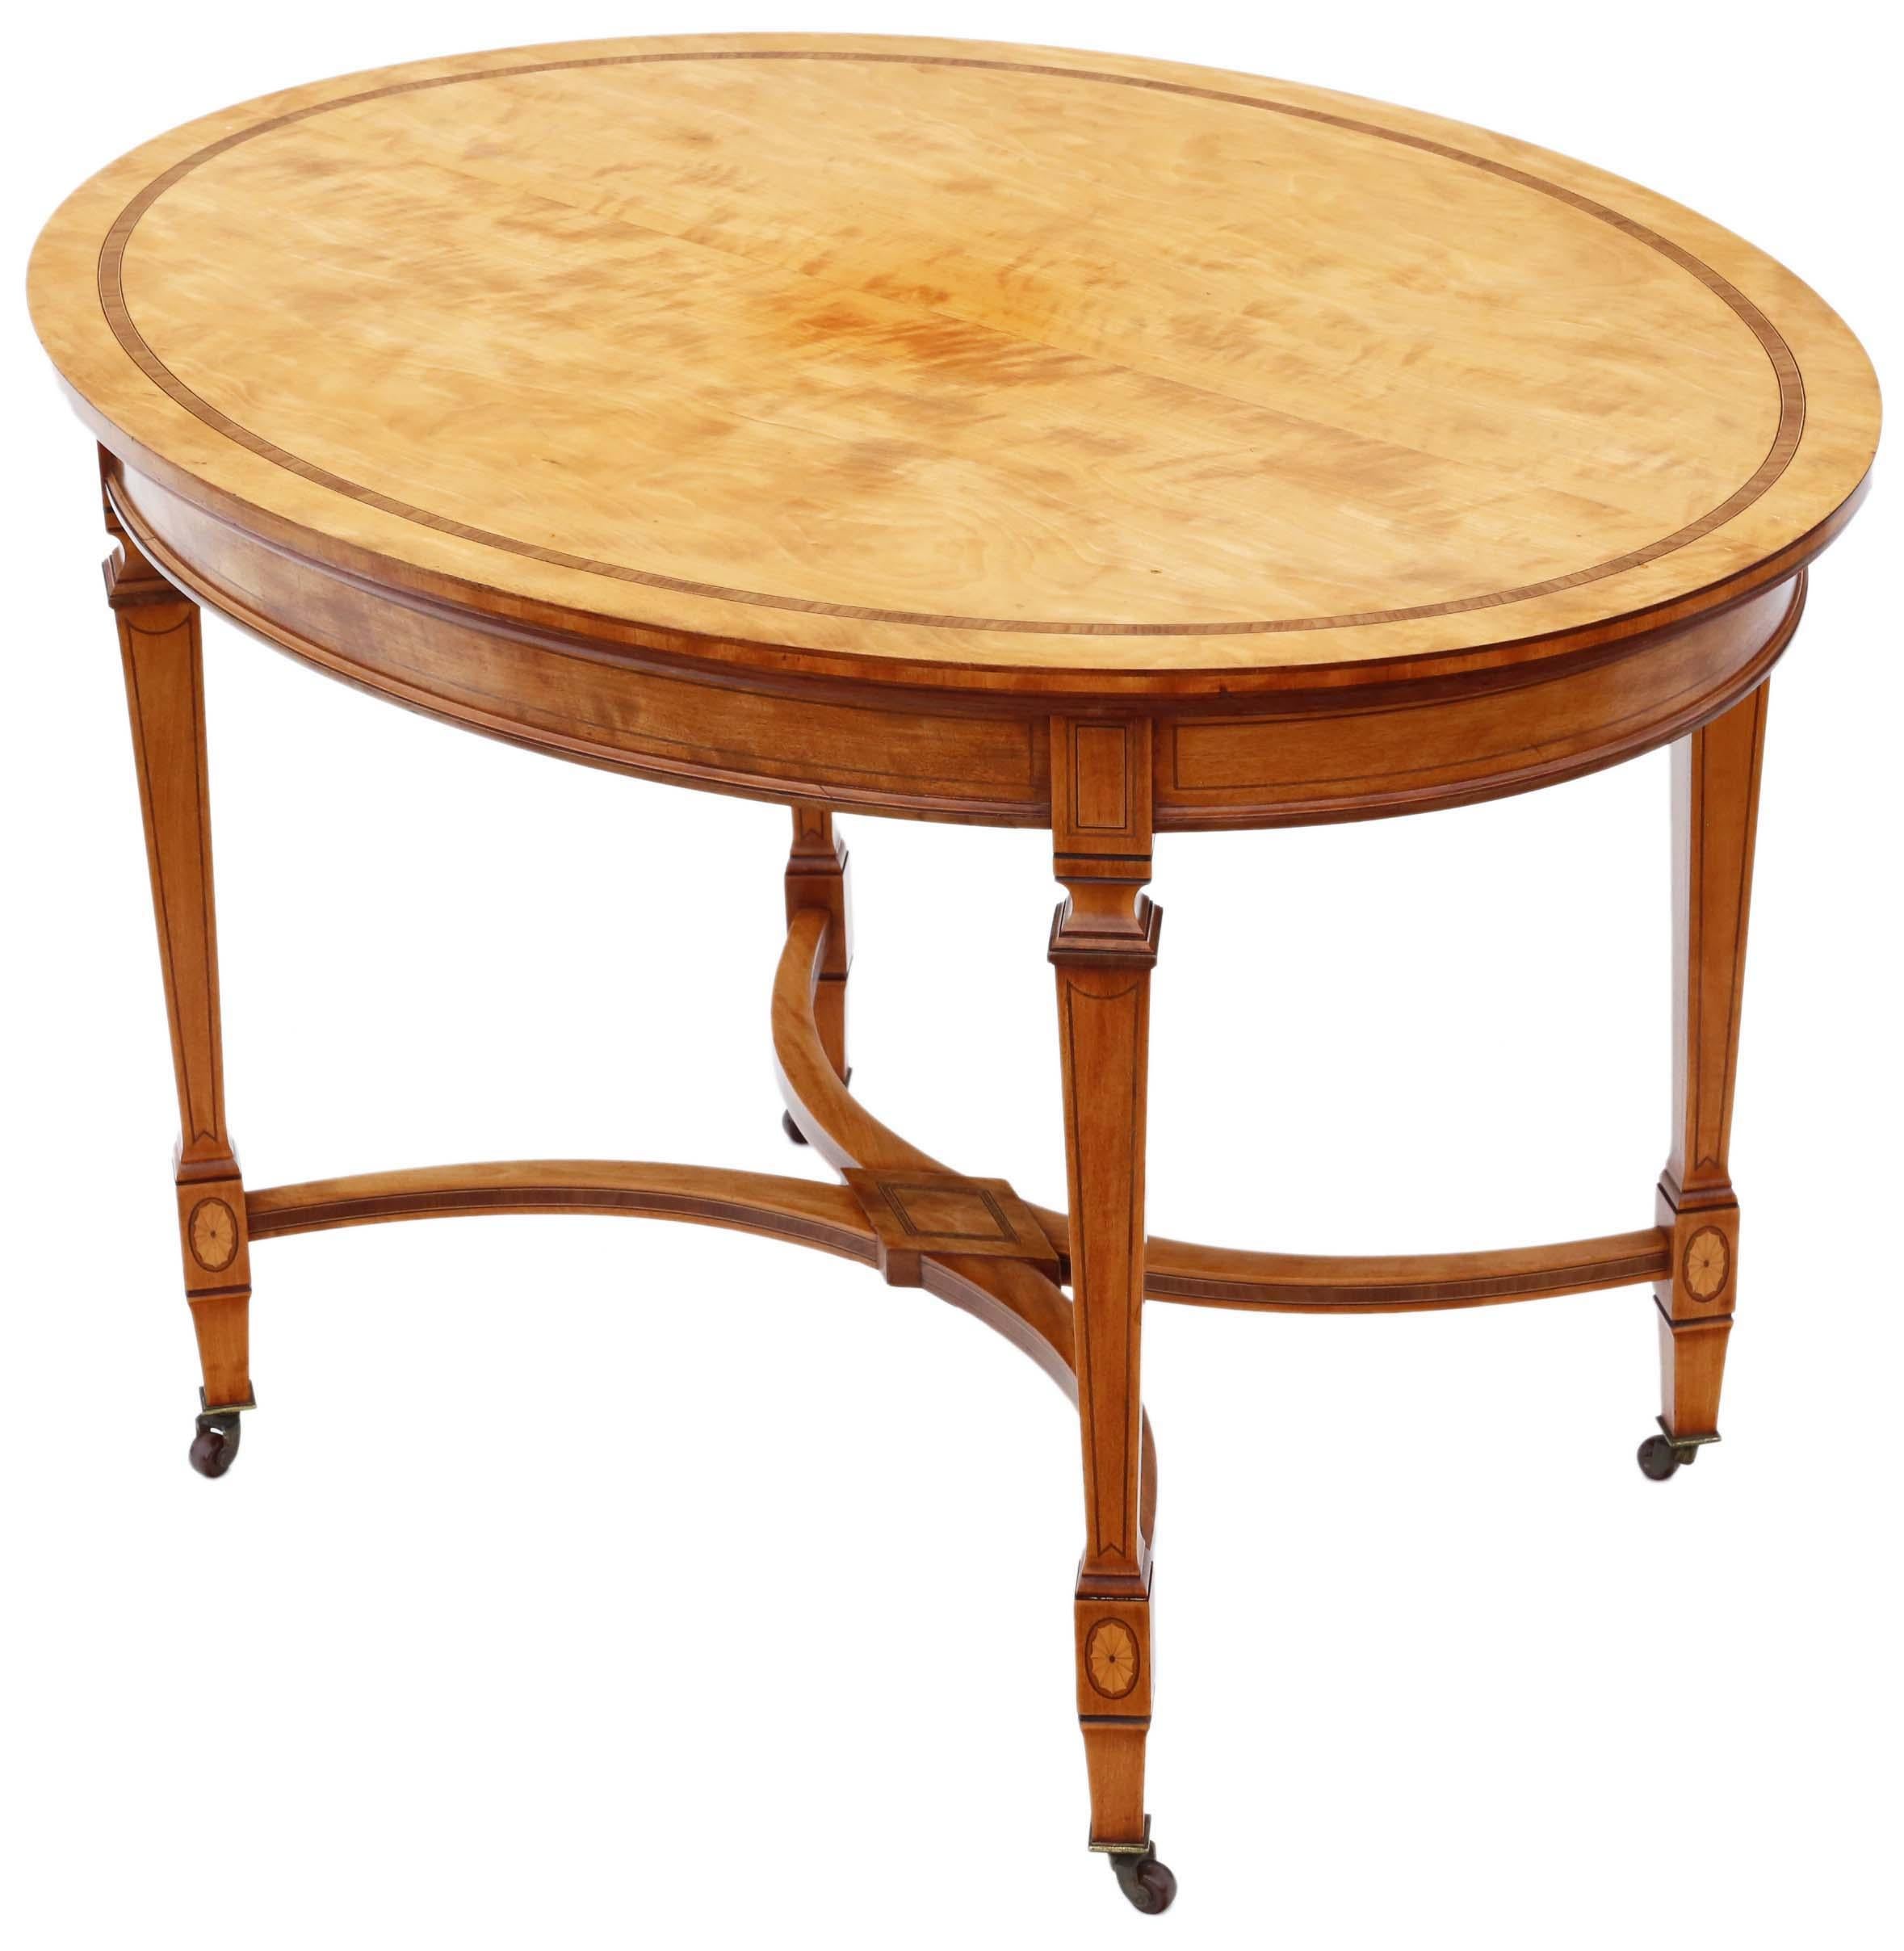 Fine Quality Victorian Inlaid Satinwood Centre Table from circa 1880-1900, Antiq For Sale 8